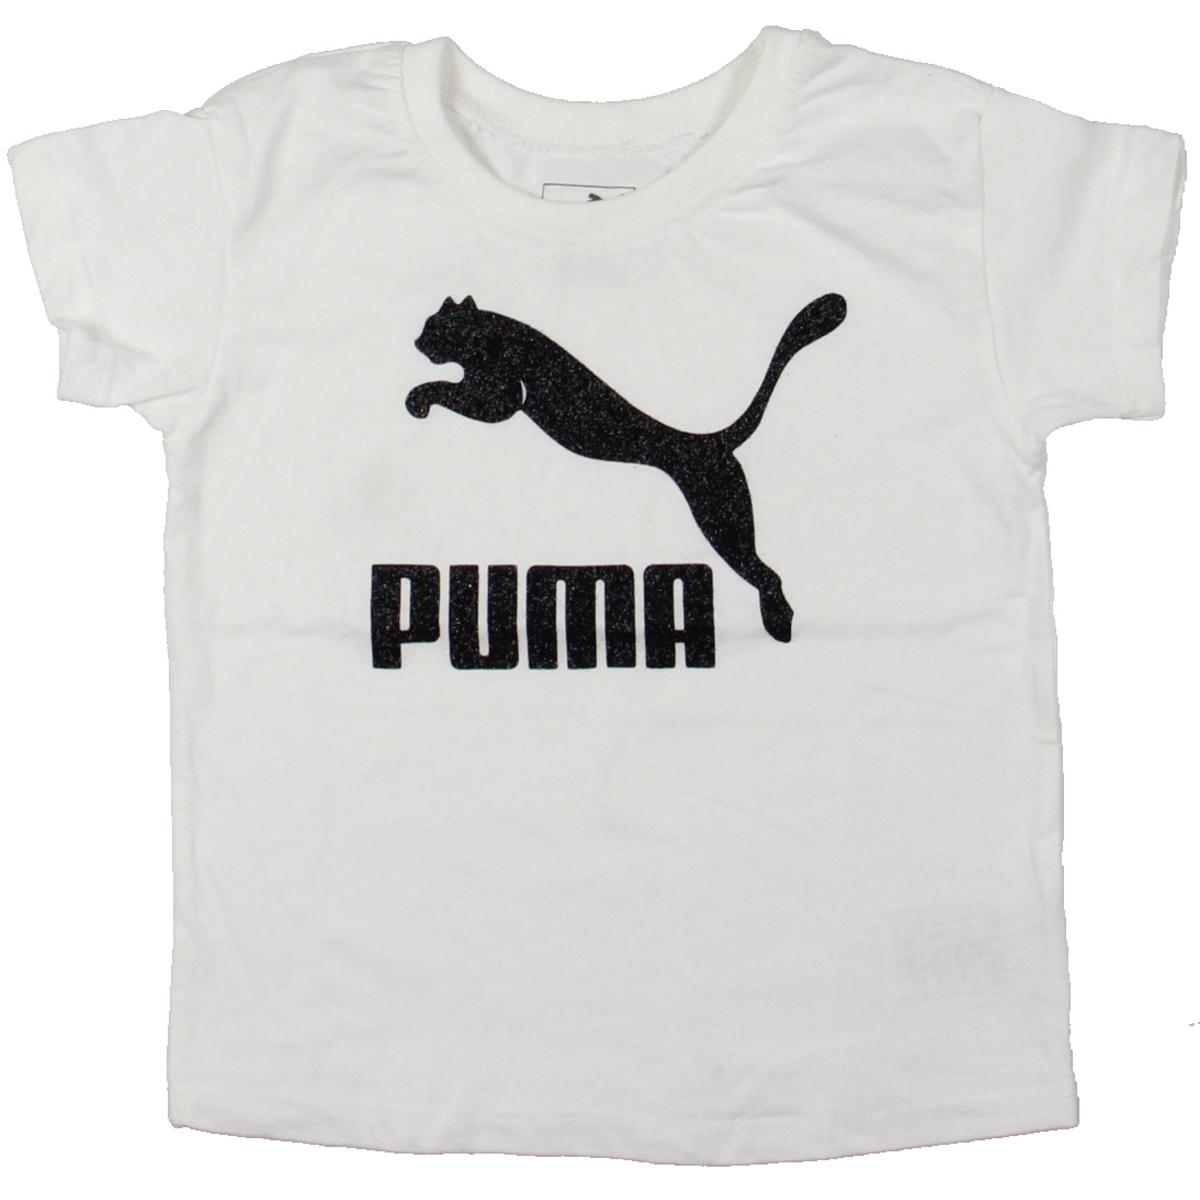 Puma White Fitness Toddler Activewear T-Shirt 2T BHFO 2726 889179166157 ...